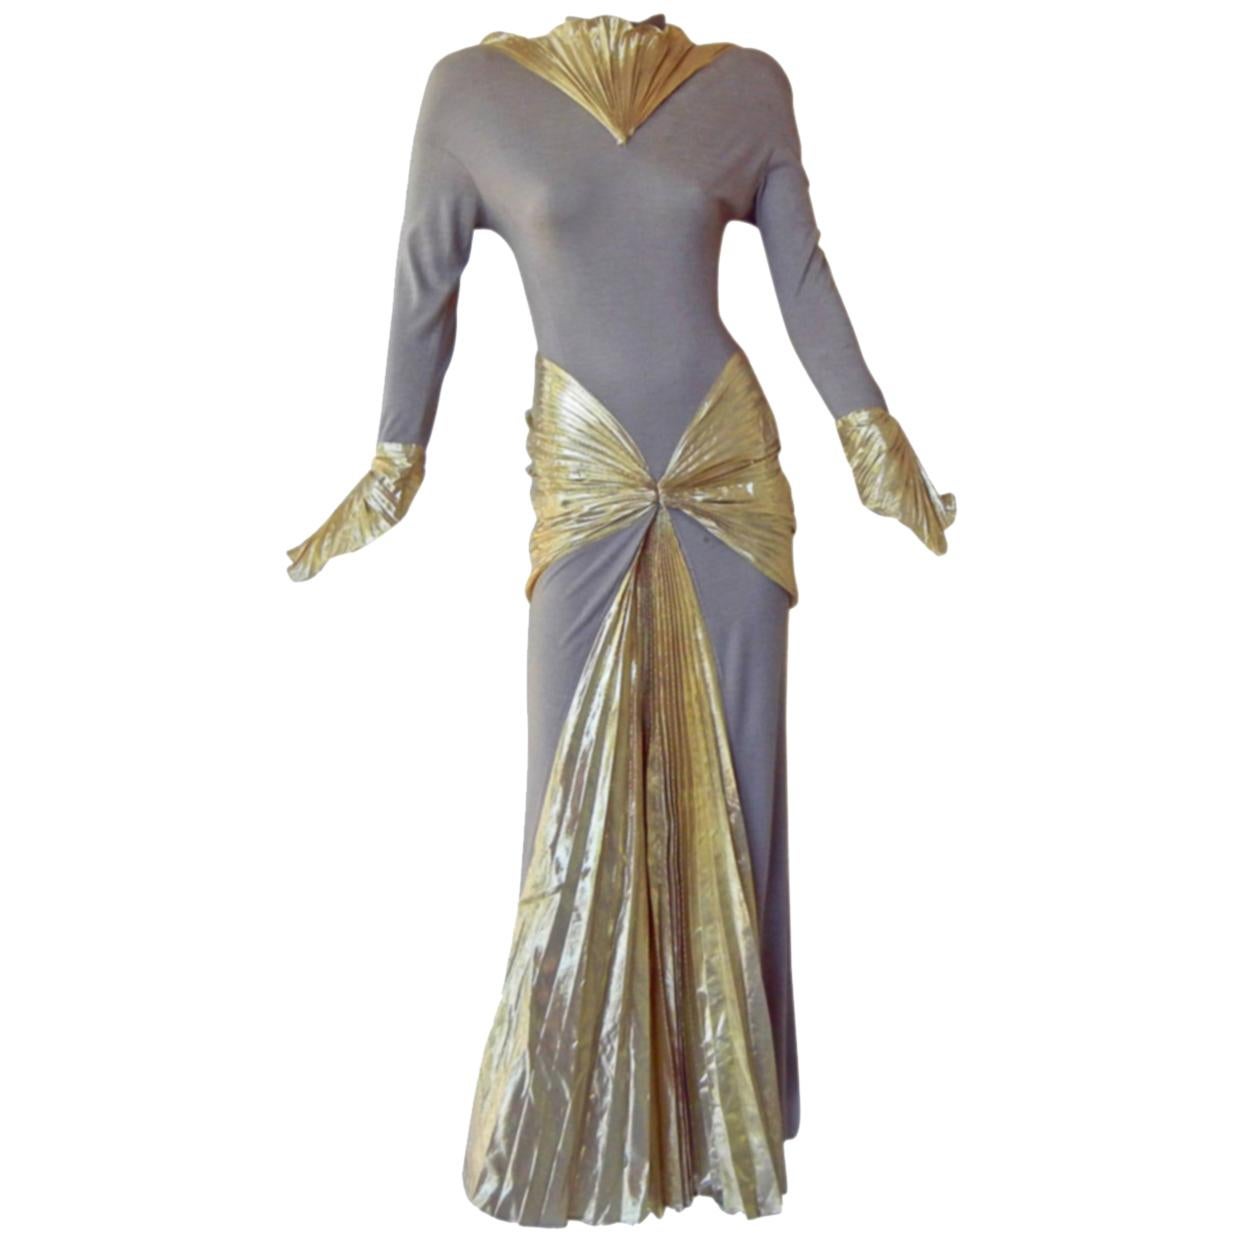 Thierry Mugler Circa 1984 Collector Gold Lame Mermaid Dress Gown